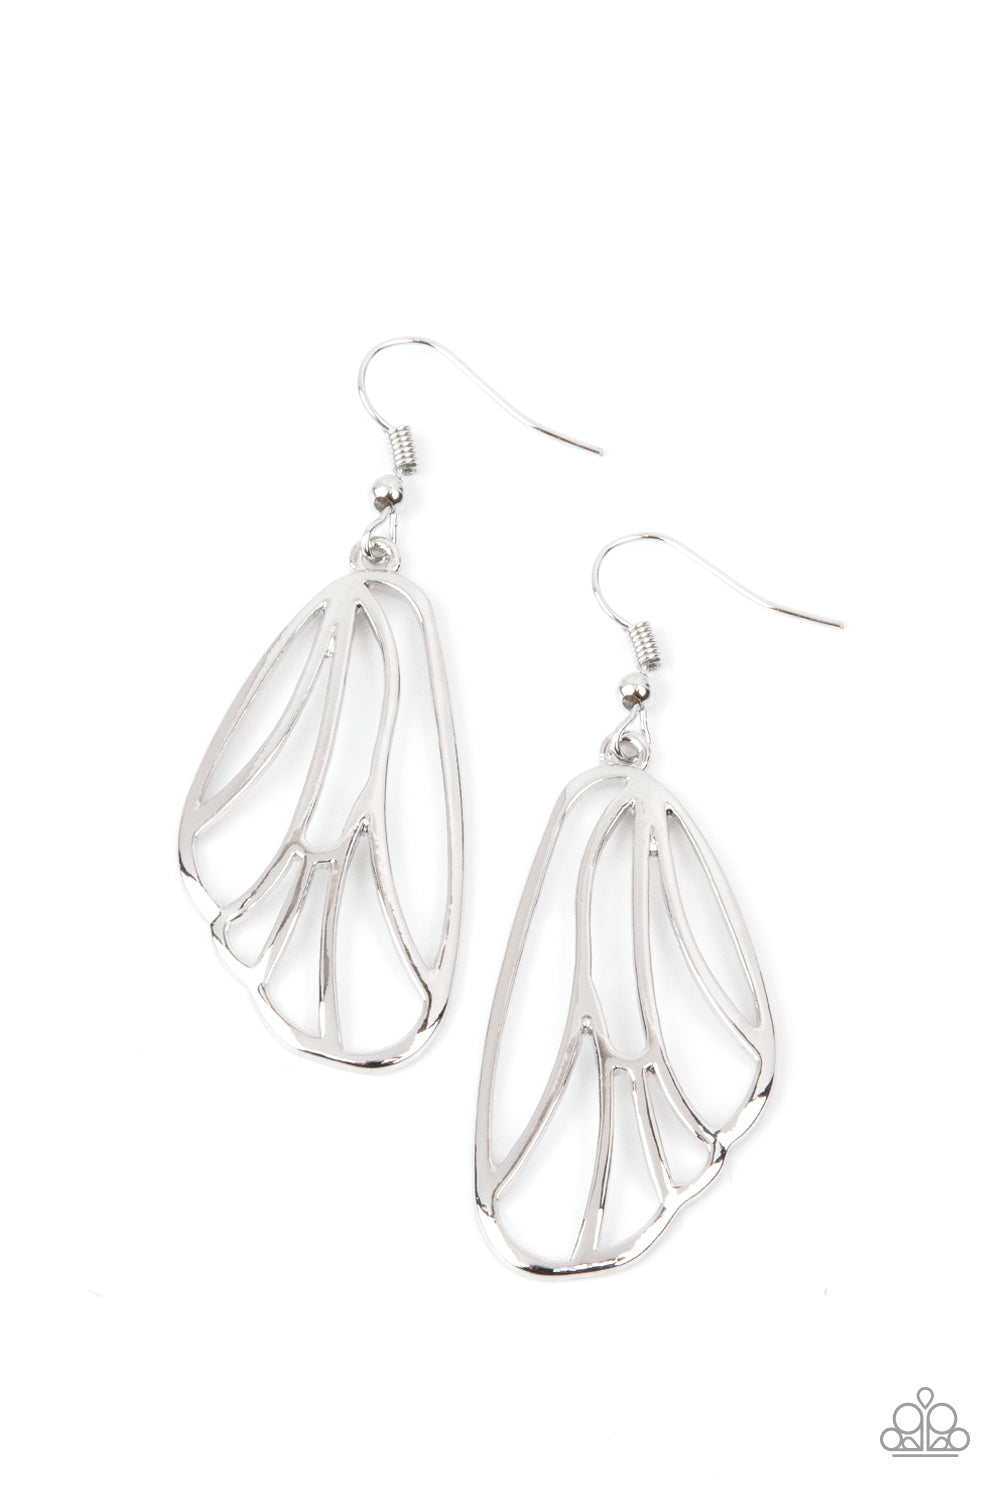 Shiny silver bars fan out into a pair of delicately scalloped wings, creating a whimsical display. Earring attaches to a standard fishhook fitting.